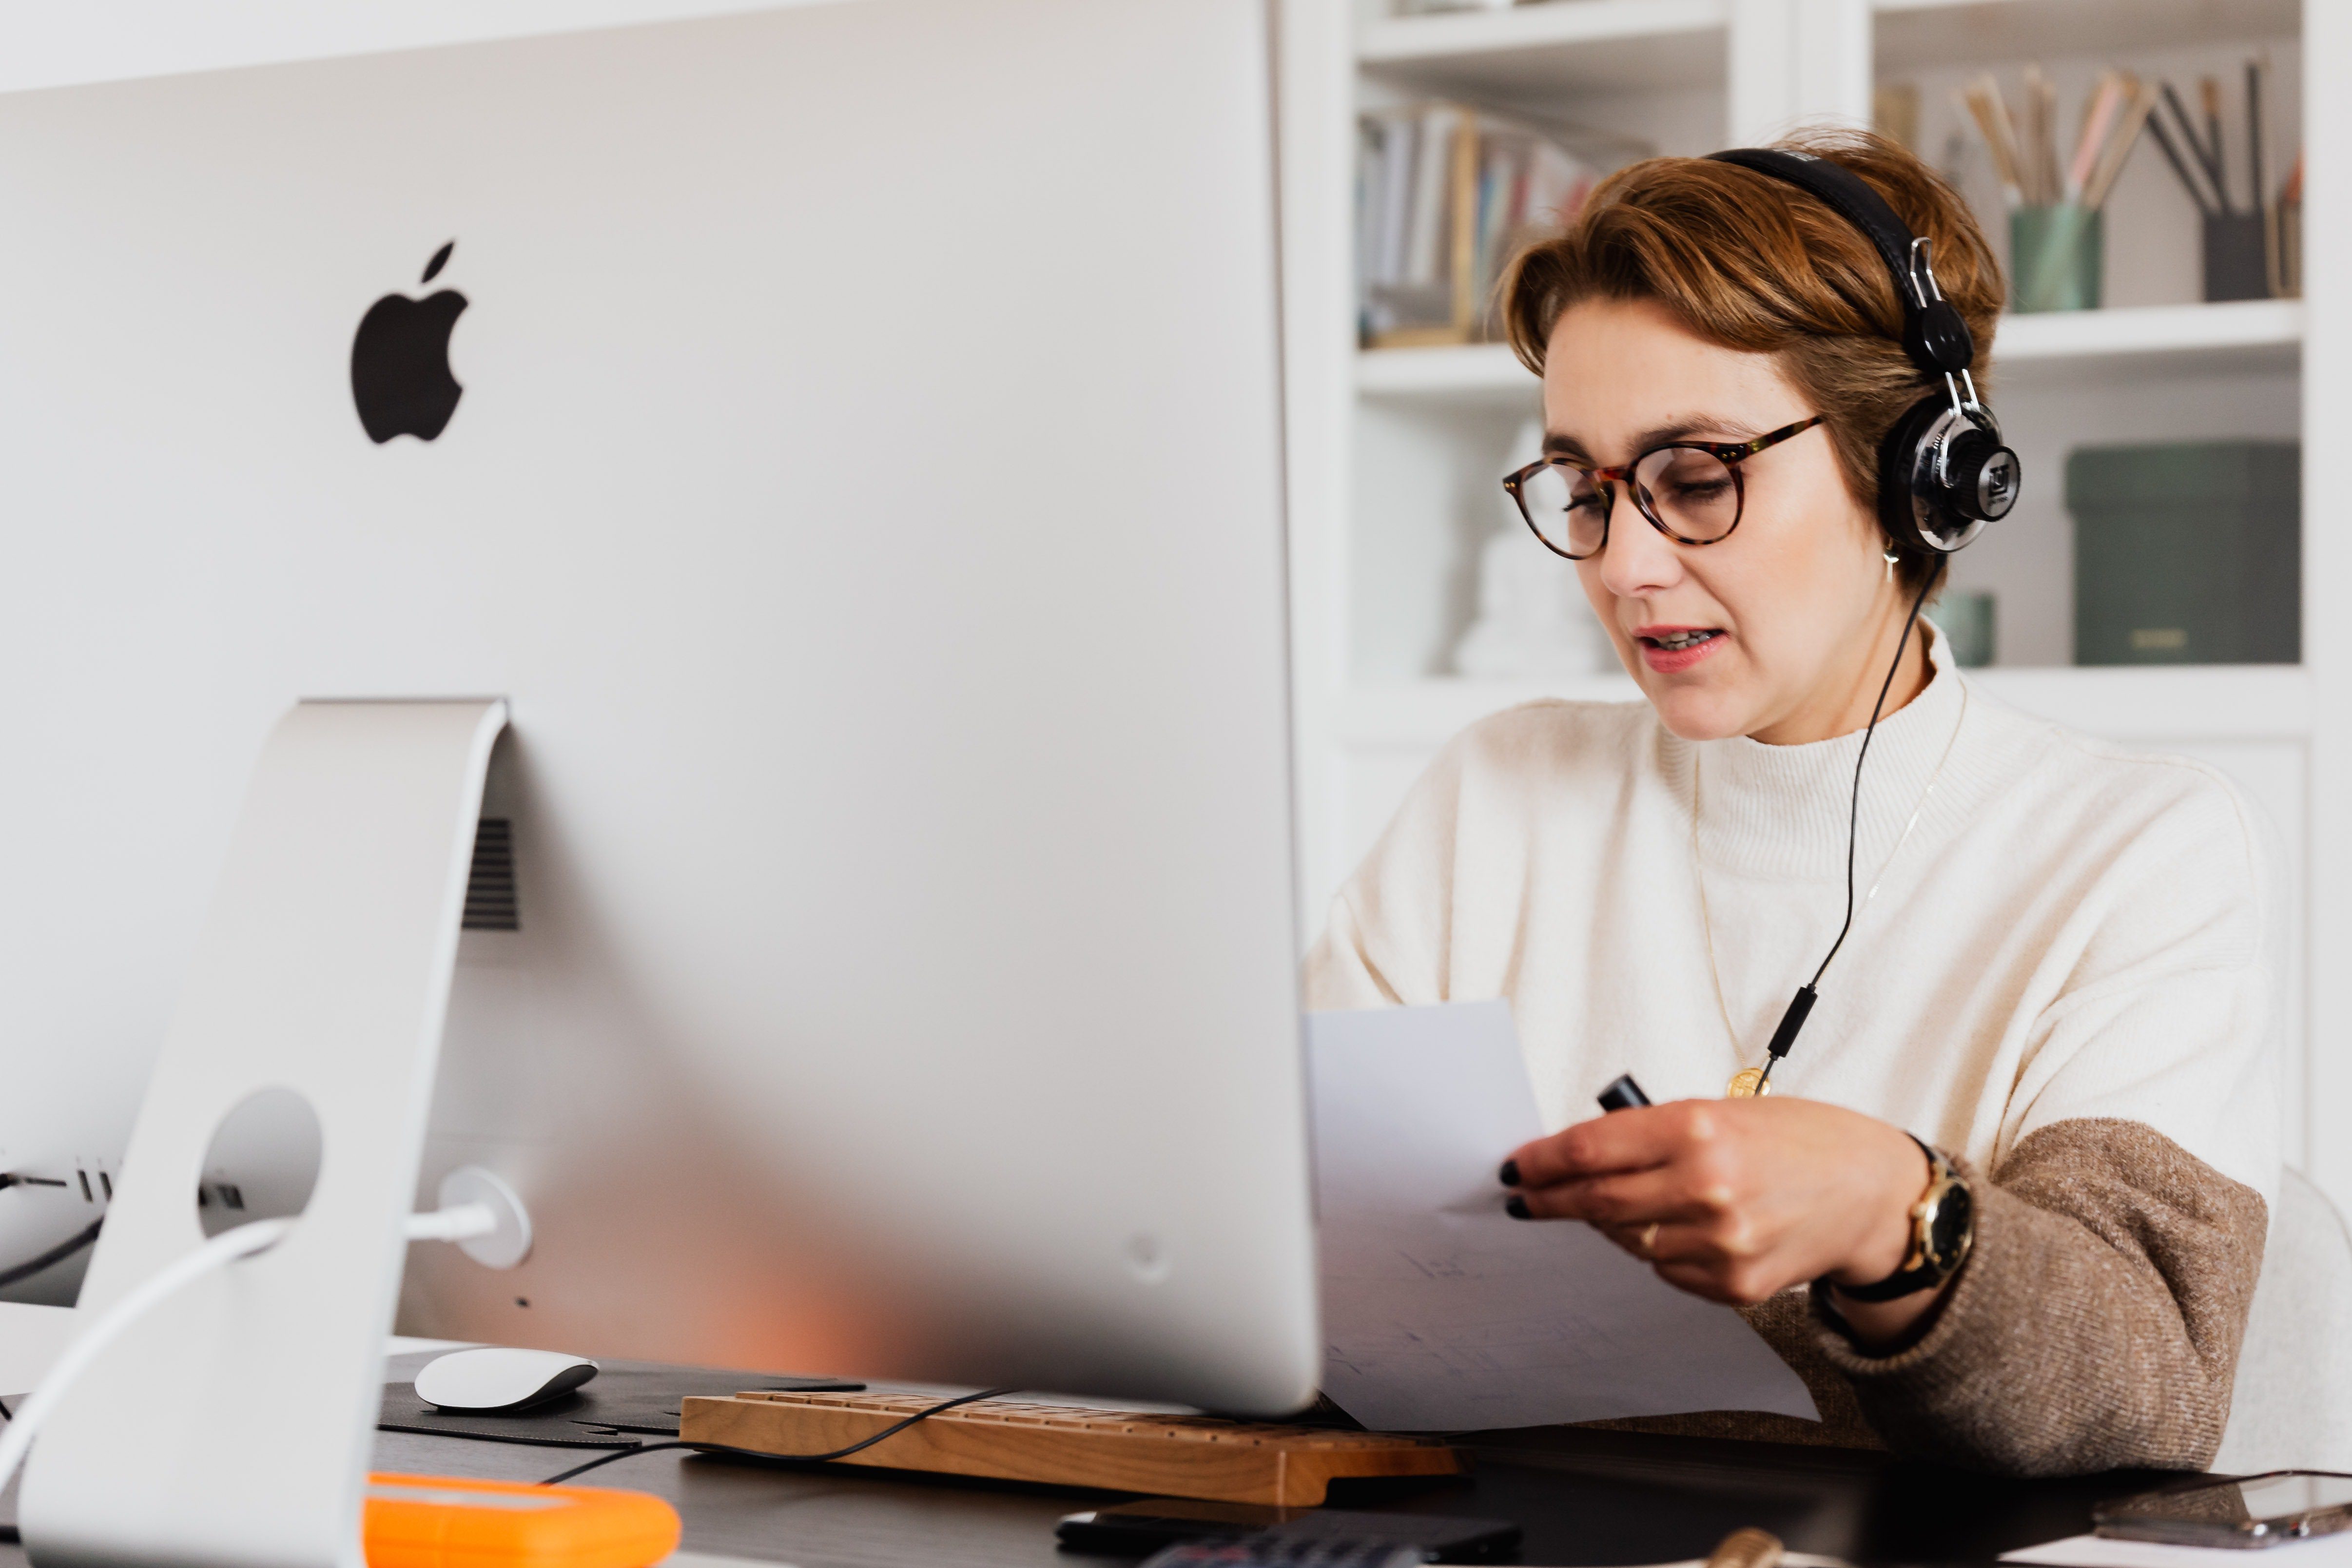 customer service representative at an apple desktop with headset on